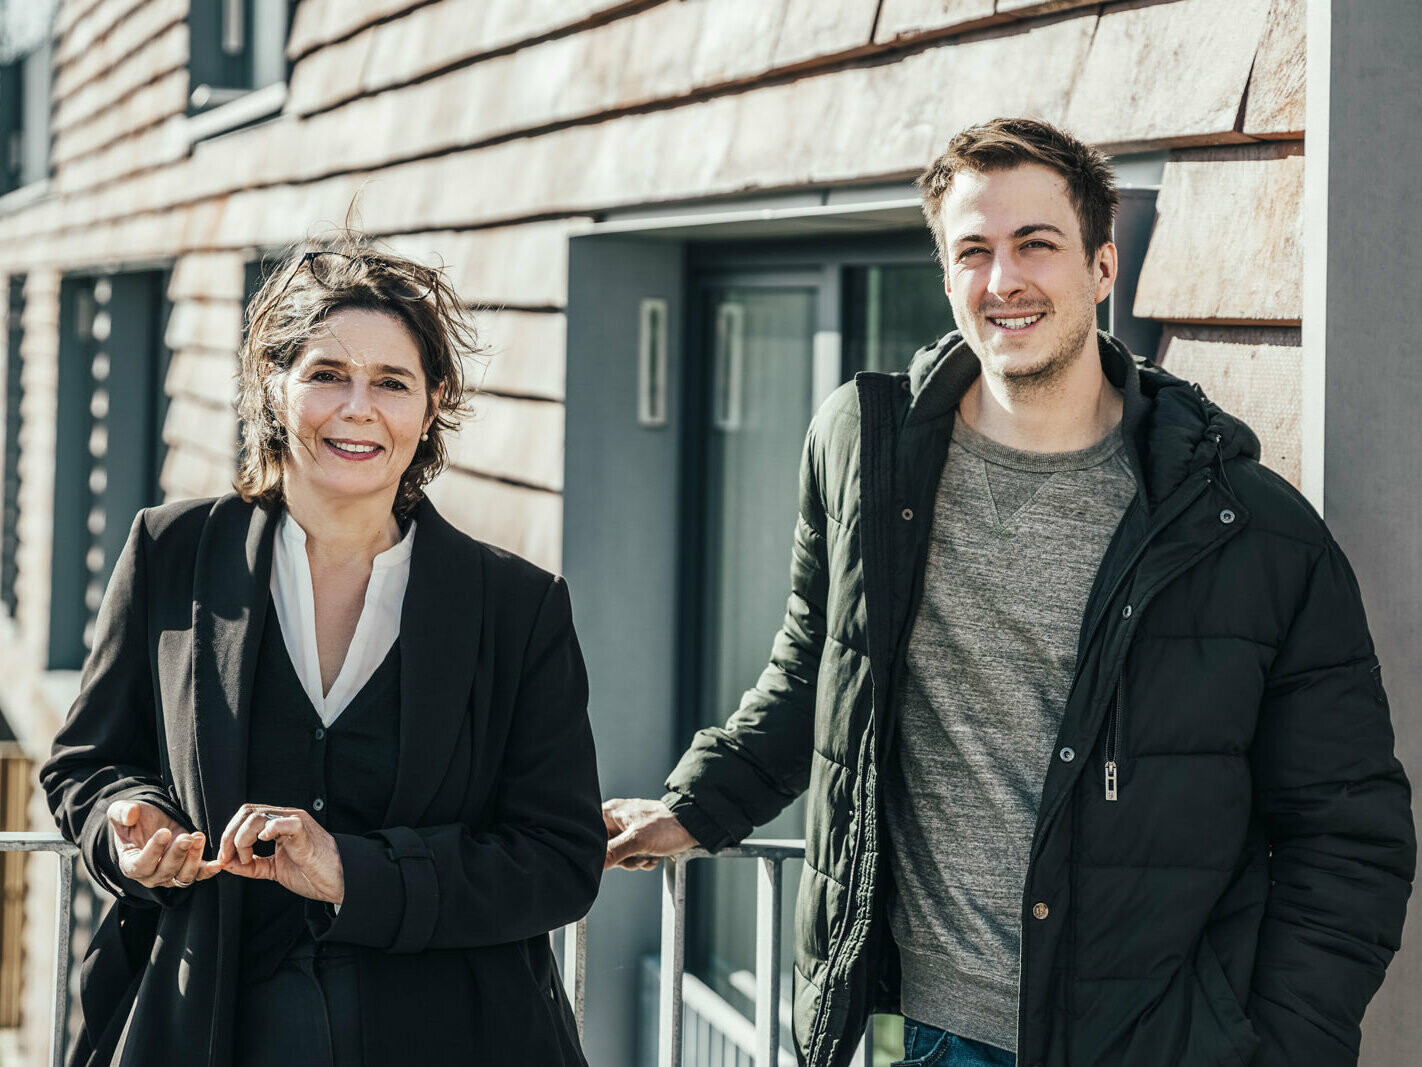 The picture shows the architects of the Töllke House in Hamburg, Christina Heeckt and Steffen Krecklow from hmarchitekten.